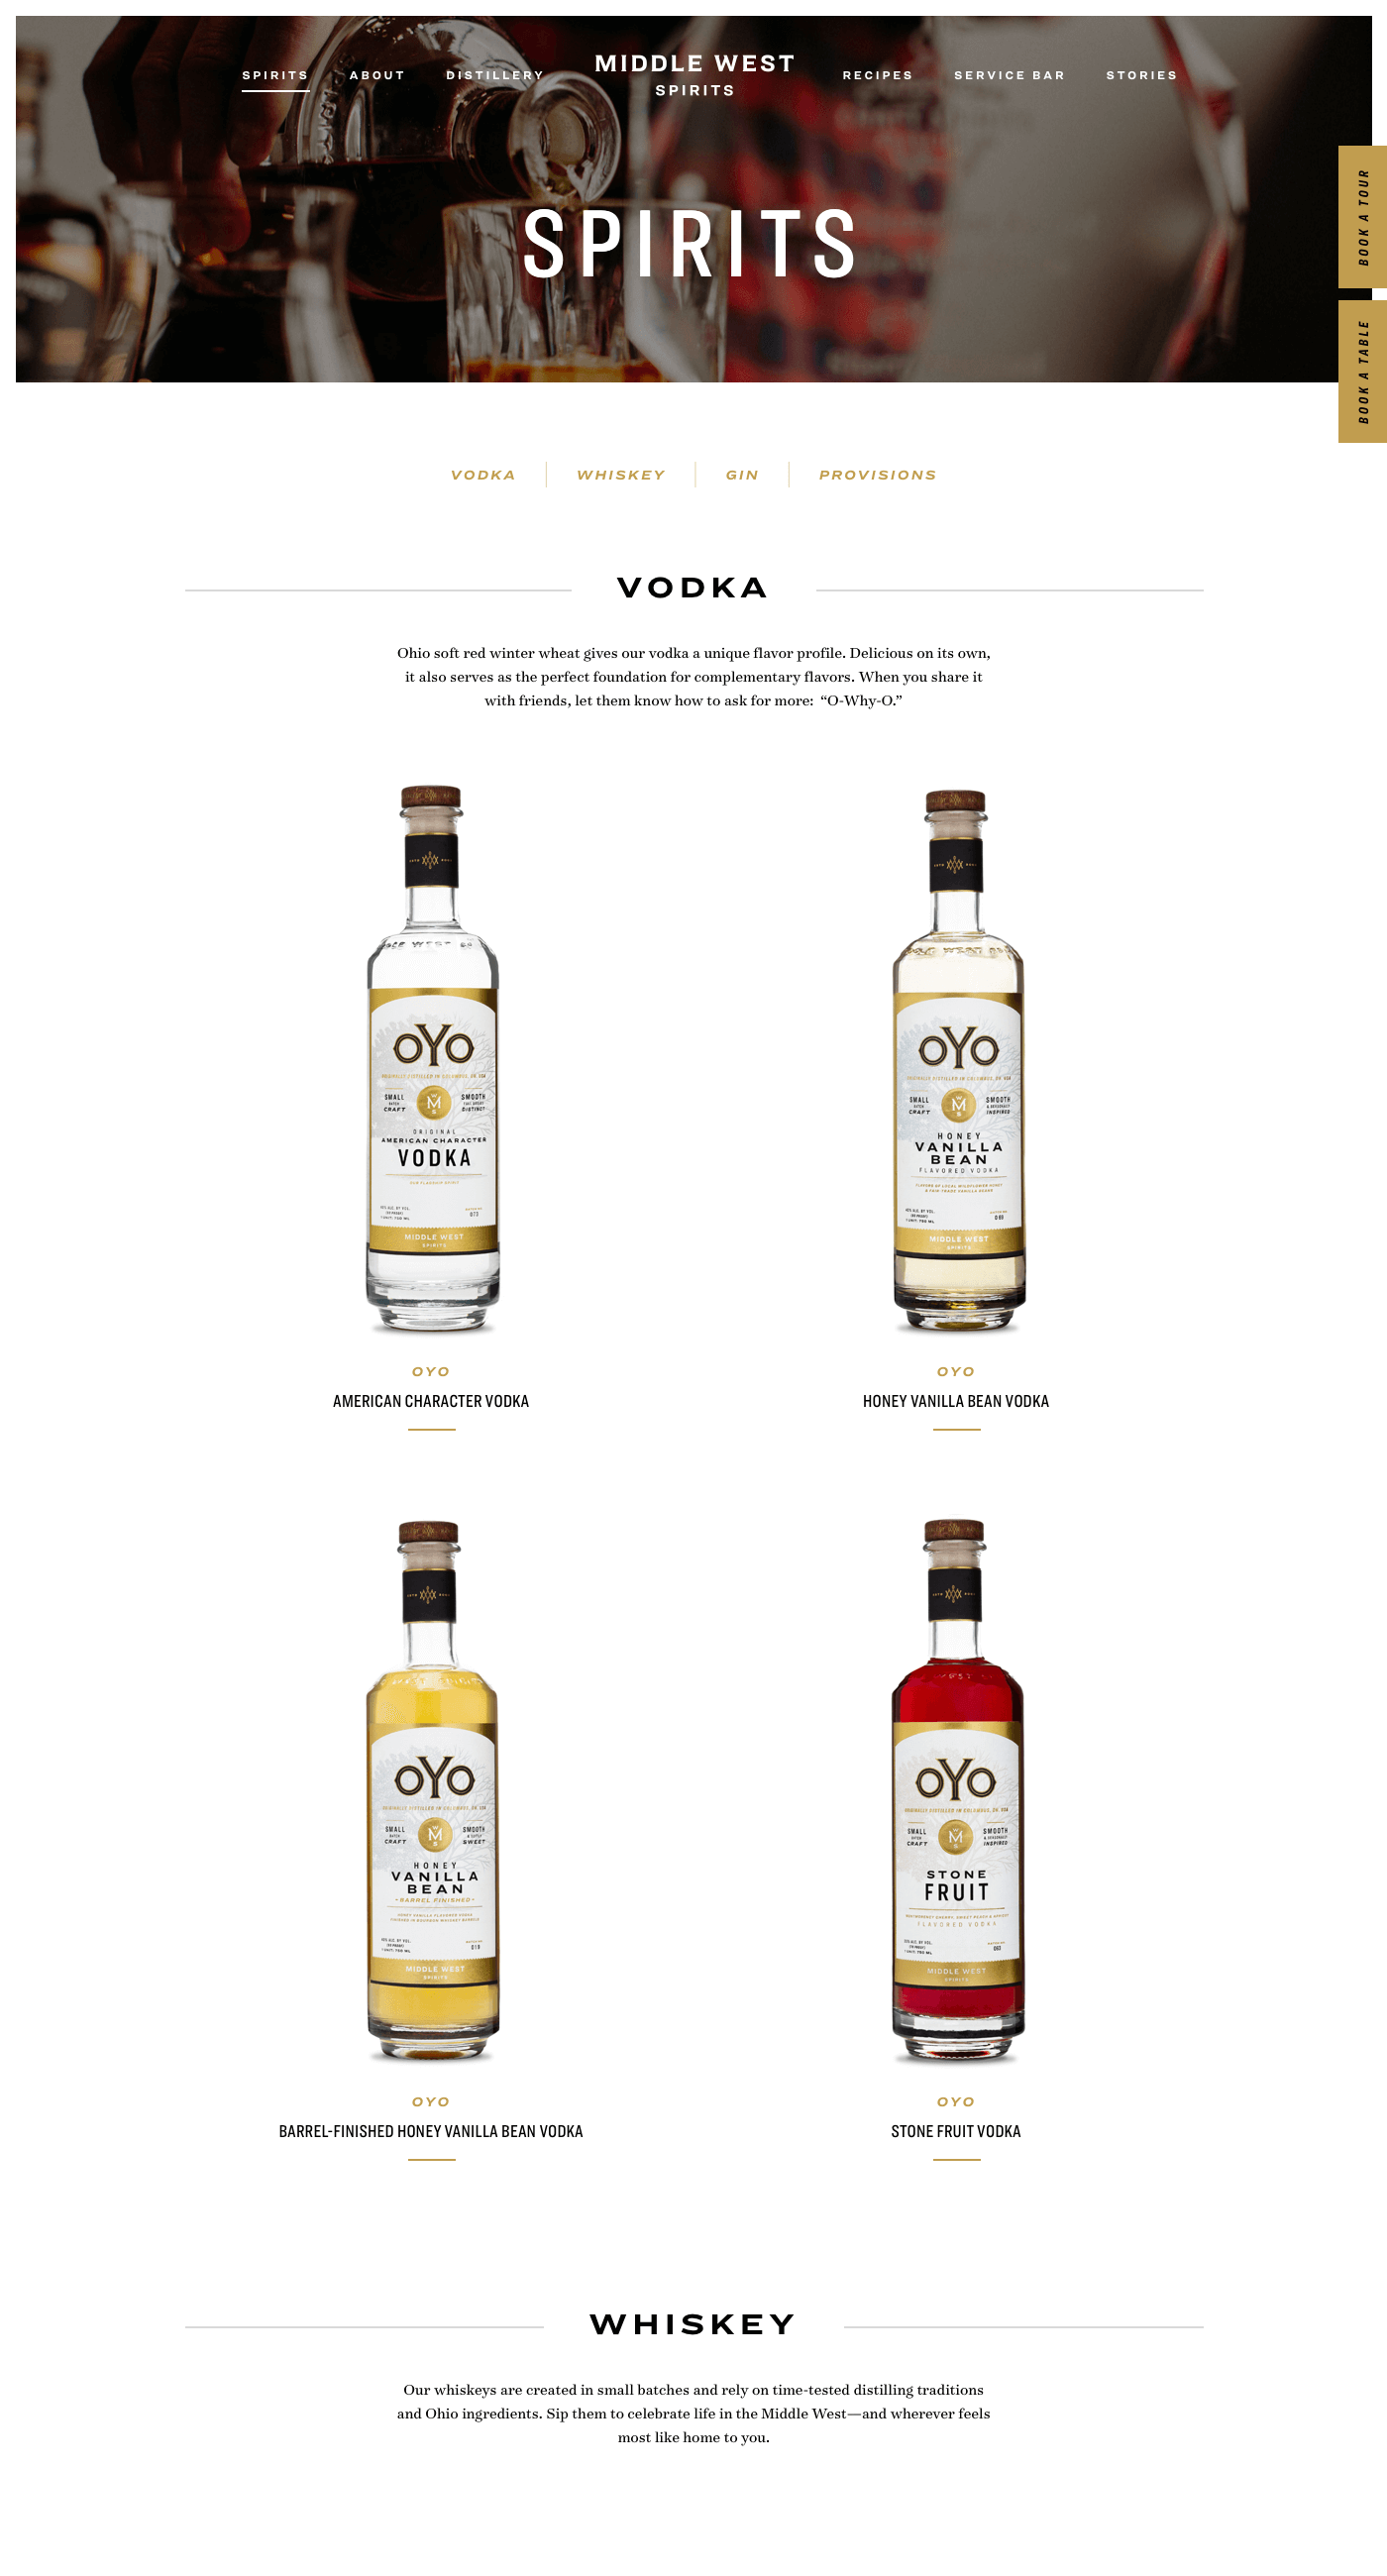 Middle West Spirits spirits page